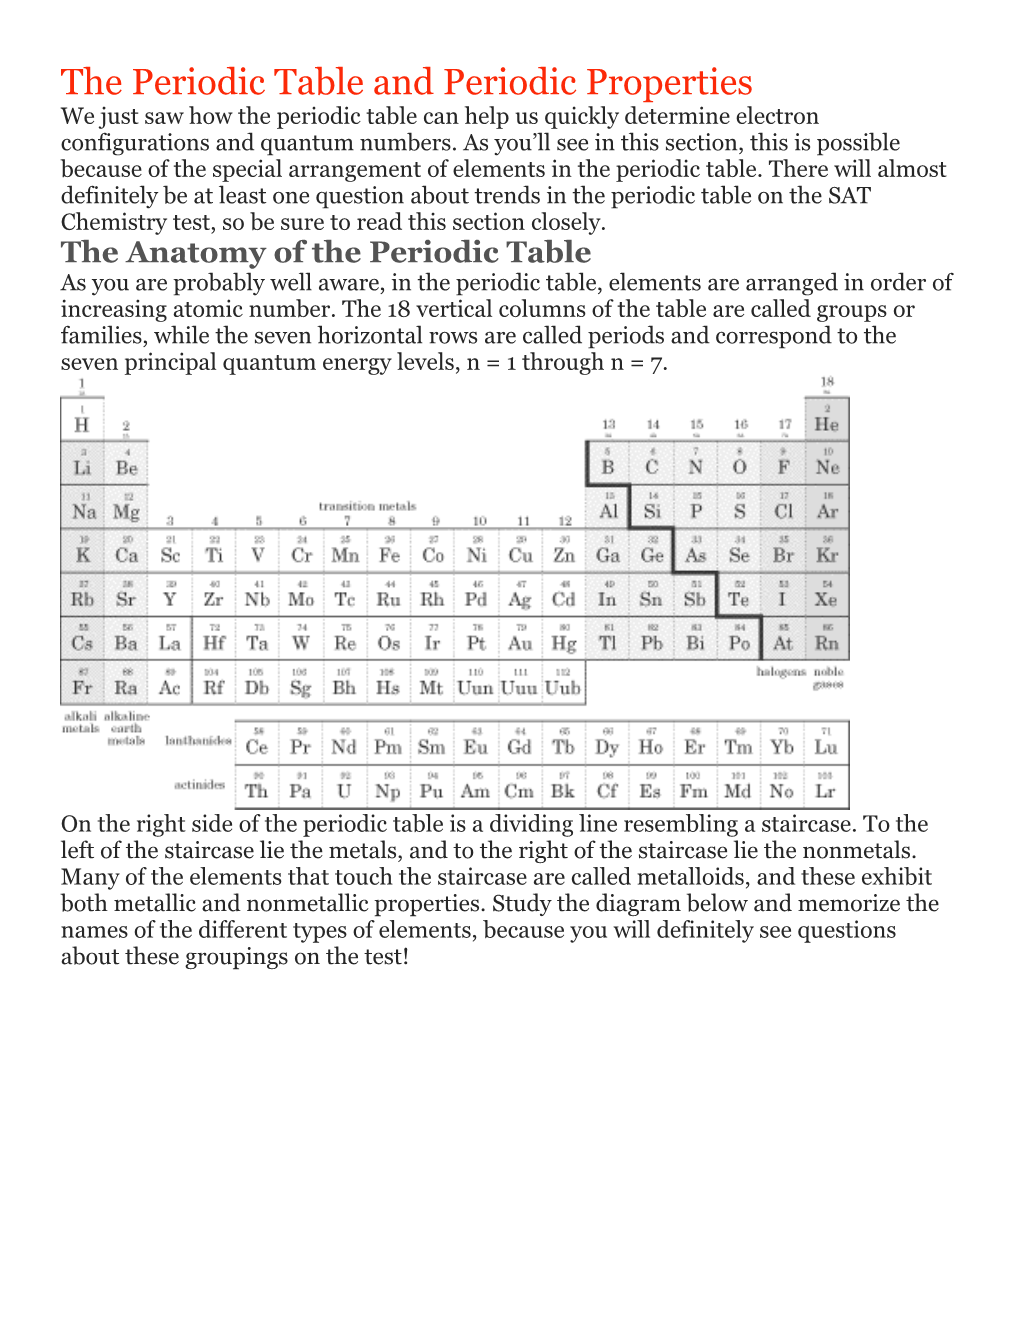 The Periodic Table and Periodic Properties